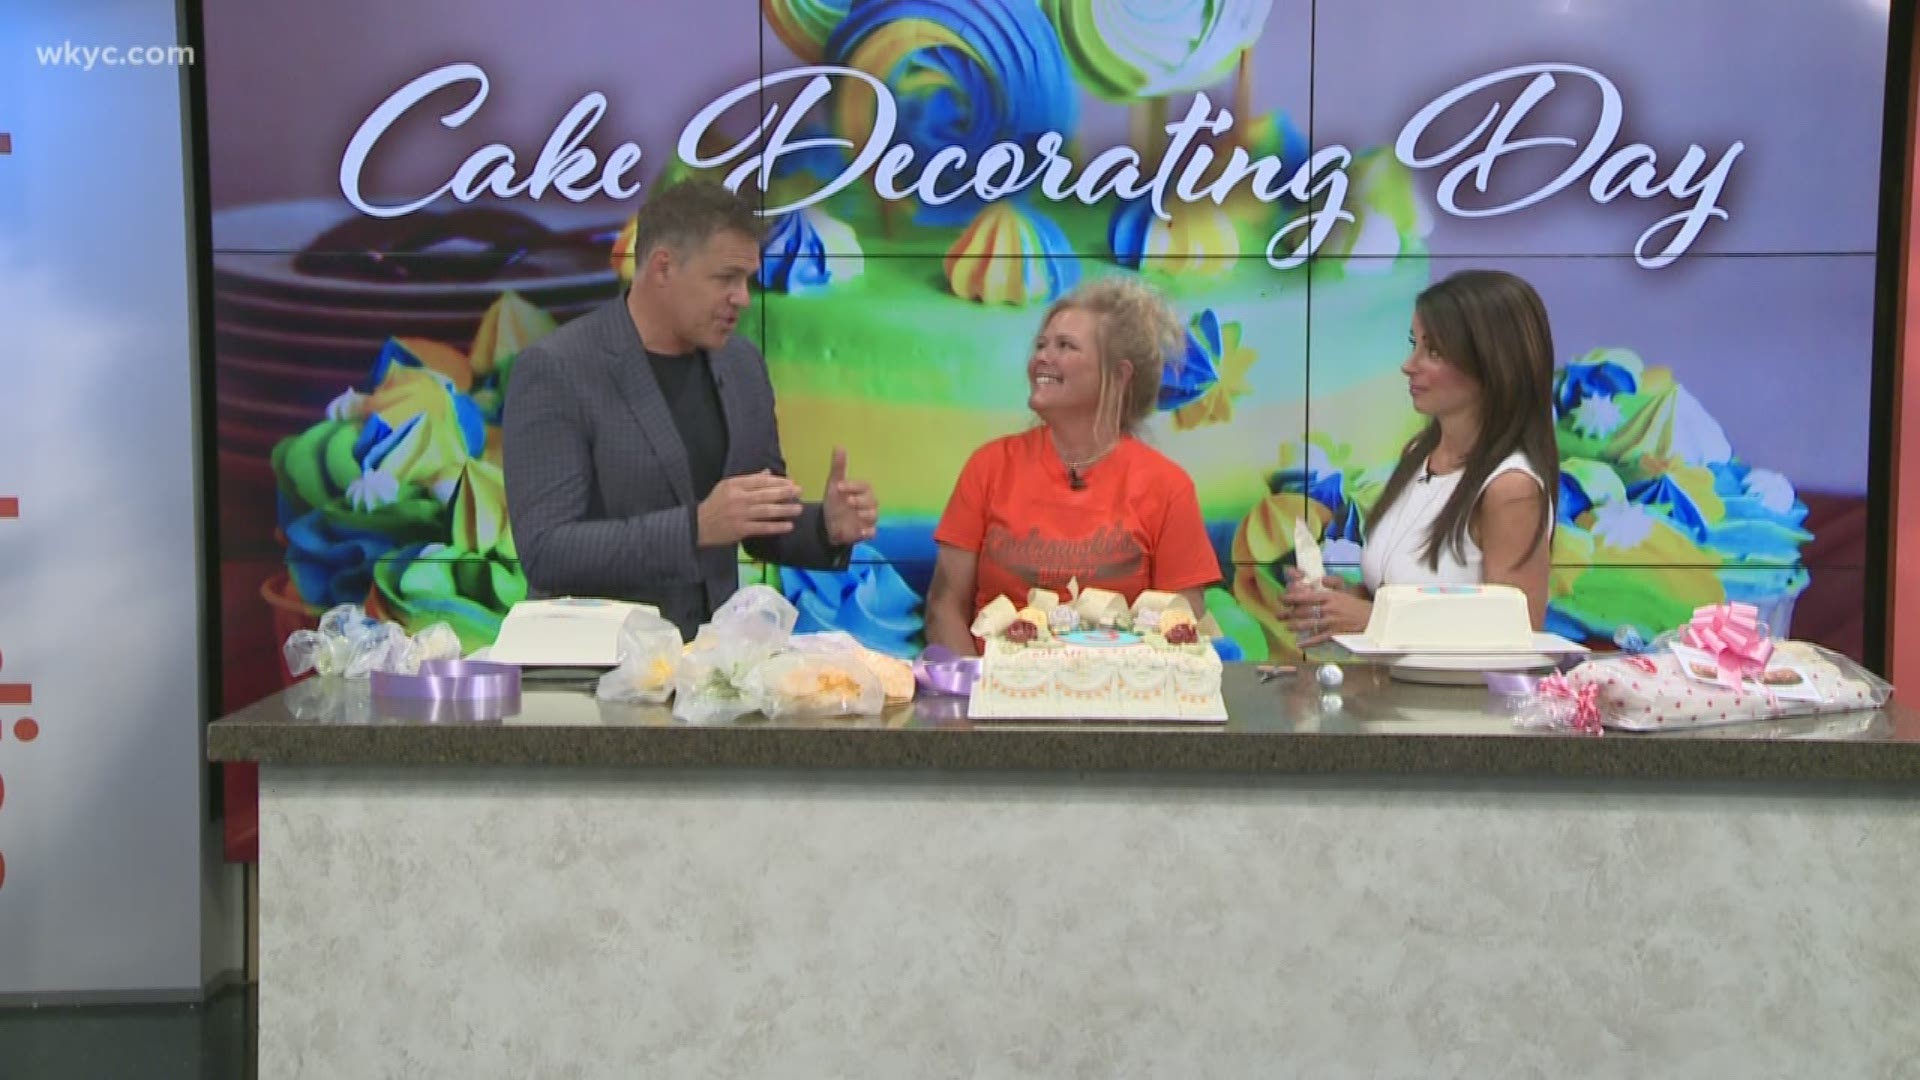 Karen Tromler from Kiedrowski’s Bakery in Amherst puts Jay Crawford and Hollie Strano to the test.